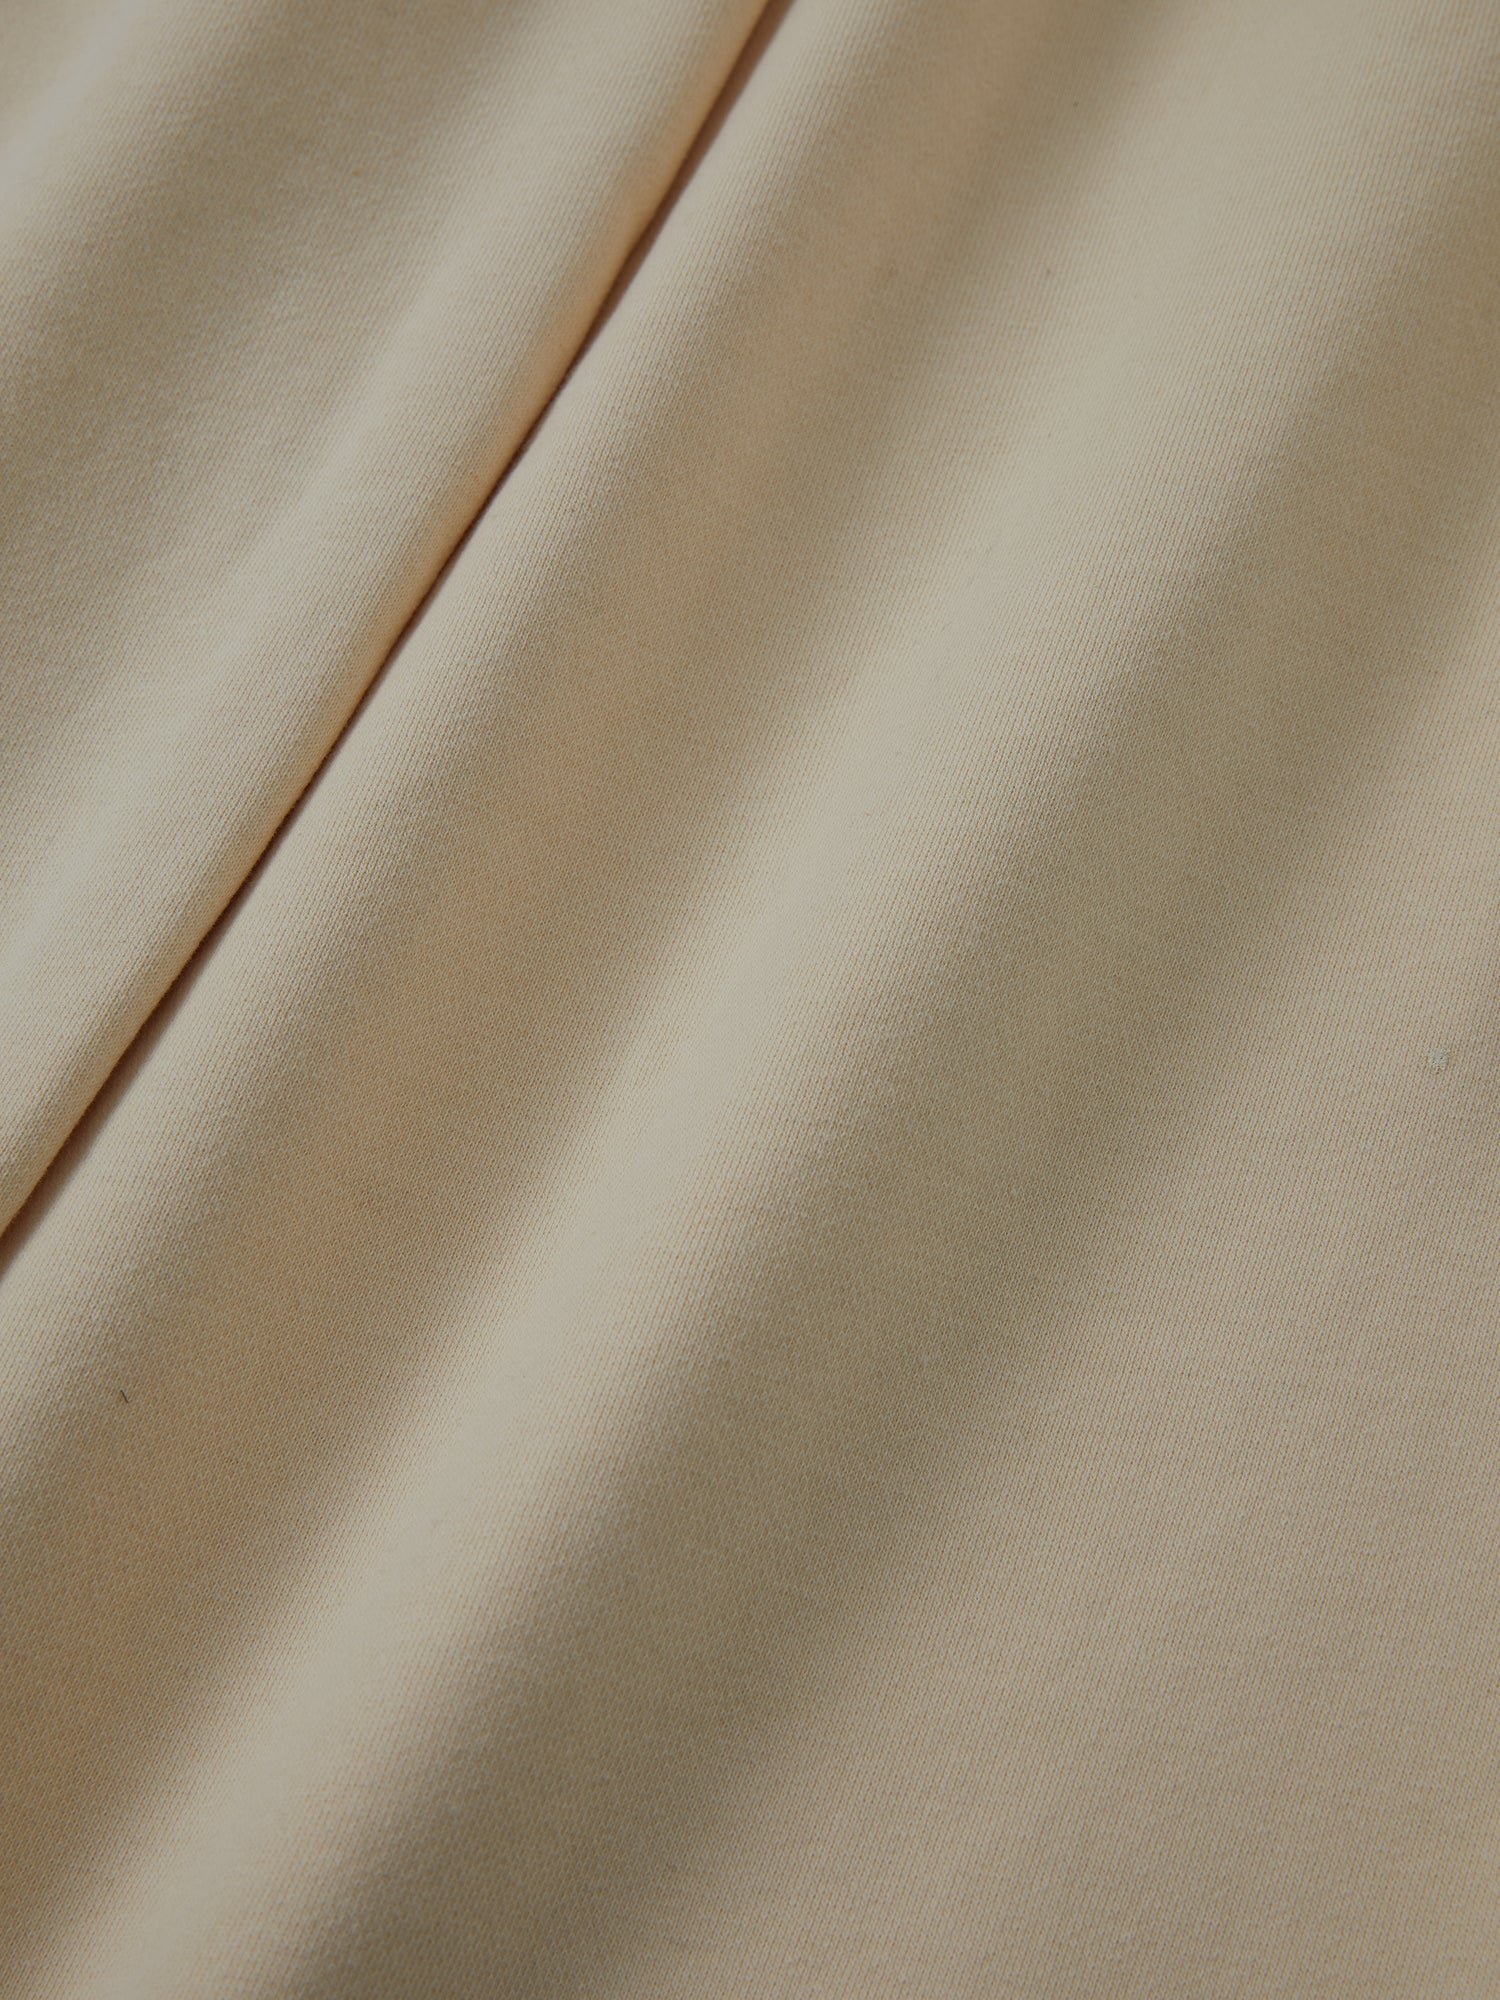 A close up of Found's Sandshell Lounge Pants, showcasing their worn-in look.